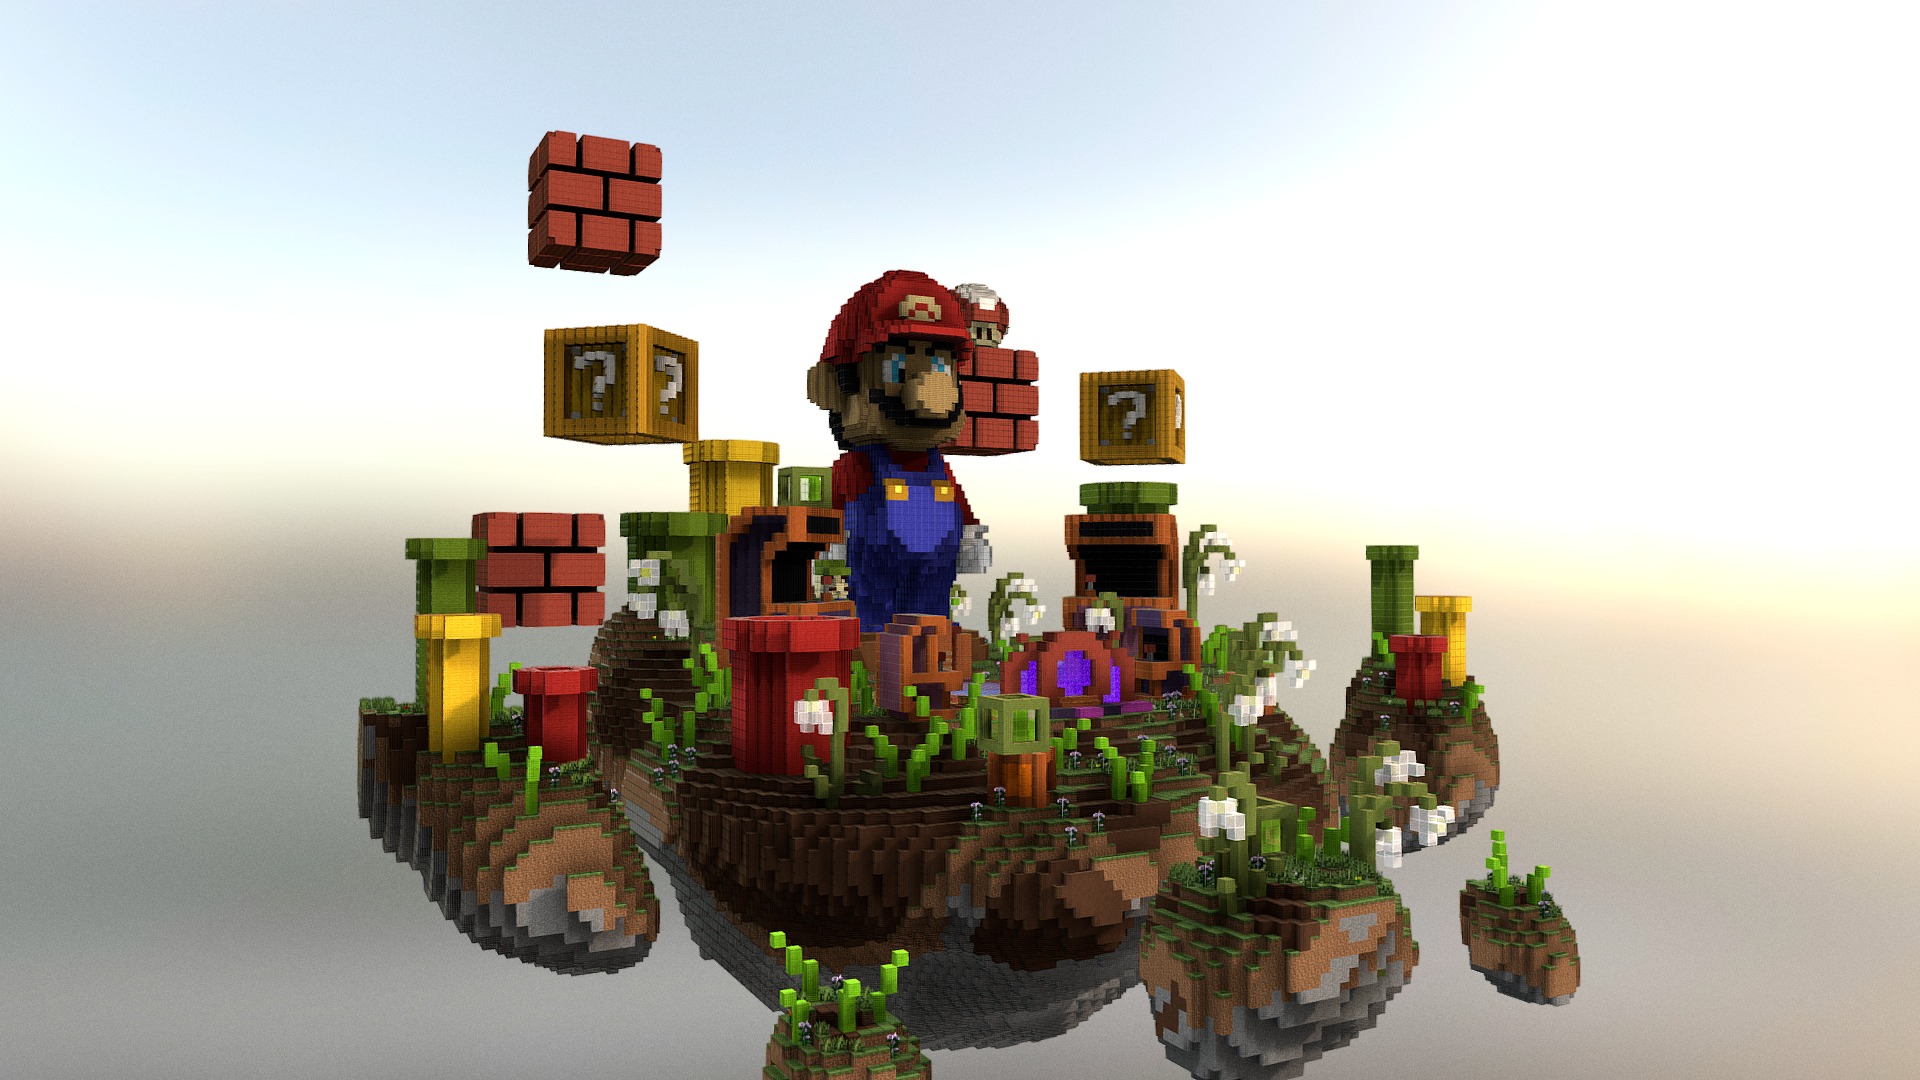 3D model Mario LobbyHub - This is a 3D model of the Mario LobbyHub. The 3D model is about a toy house on a small island.